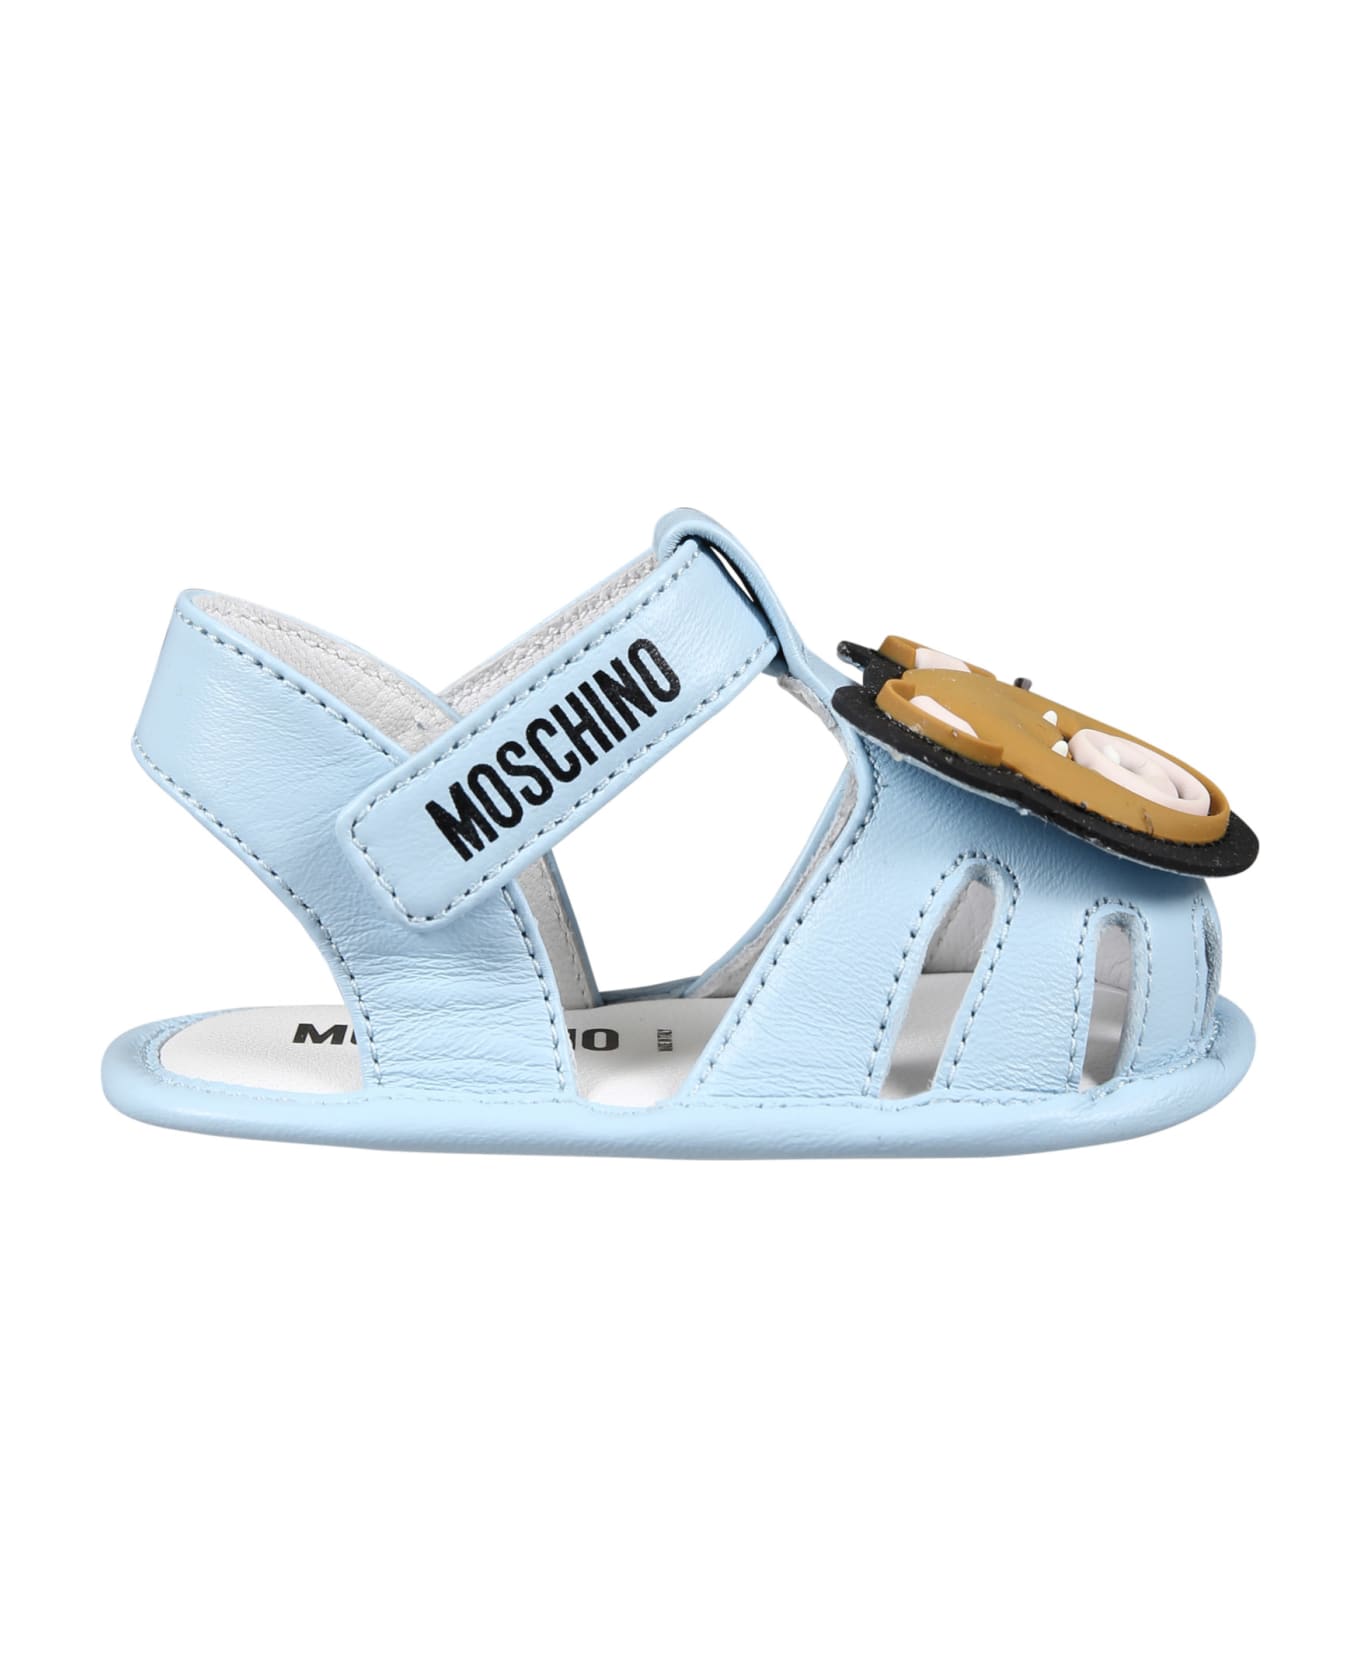 Moschino Light Blue Sandals For Baby Boy With Teddy Bear - Light Blue シューズ